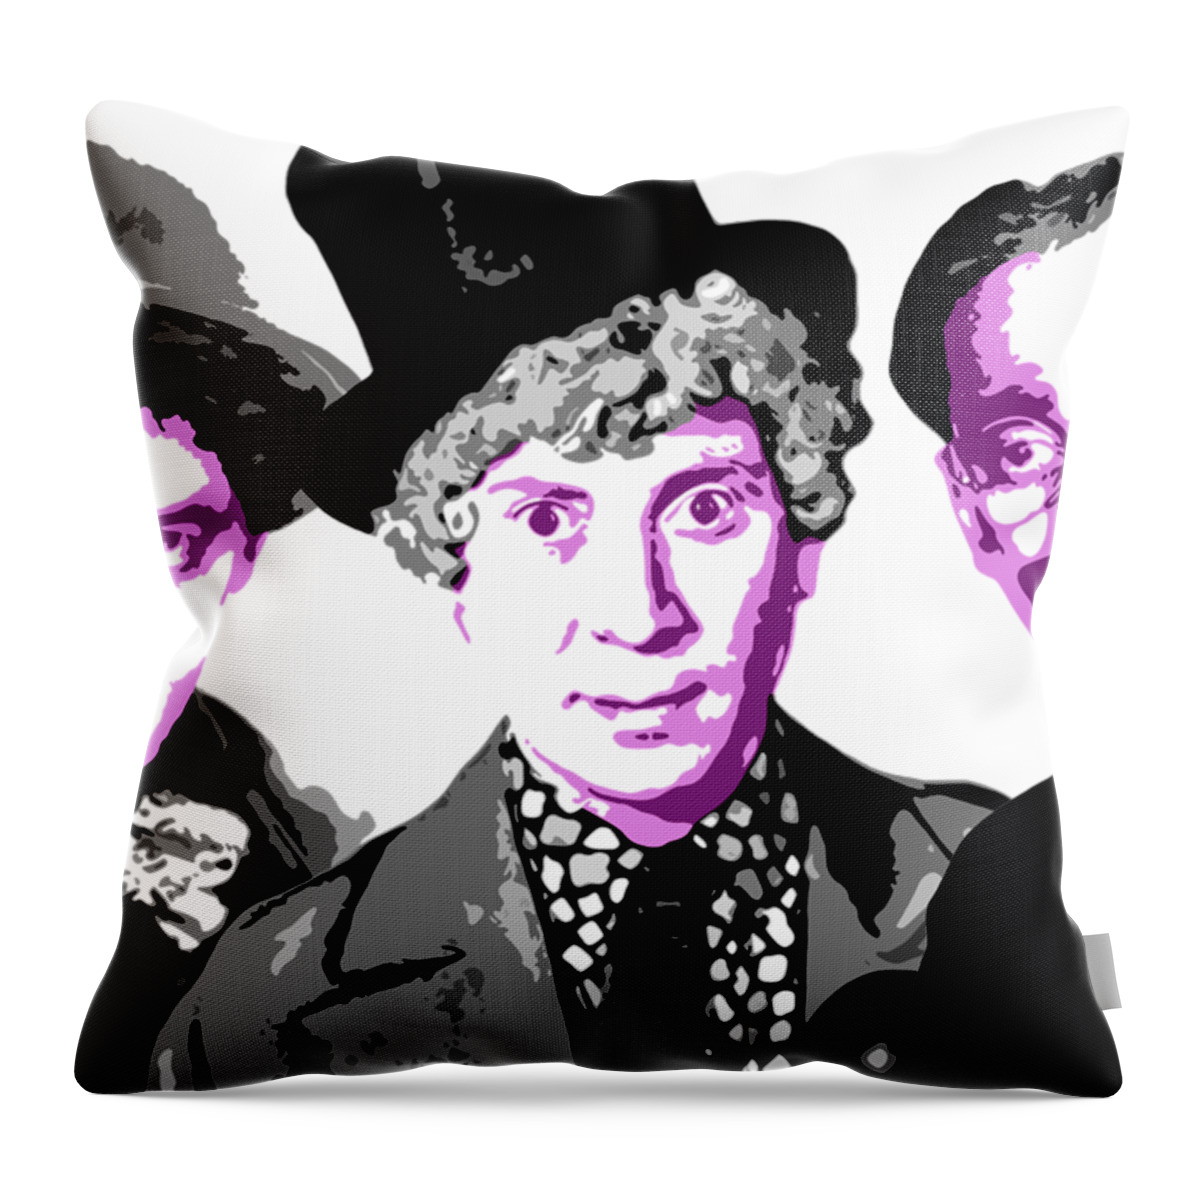 Marx Brothers Throw Pillow featuring the digital art Marx Brothers by DB Artist